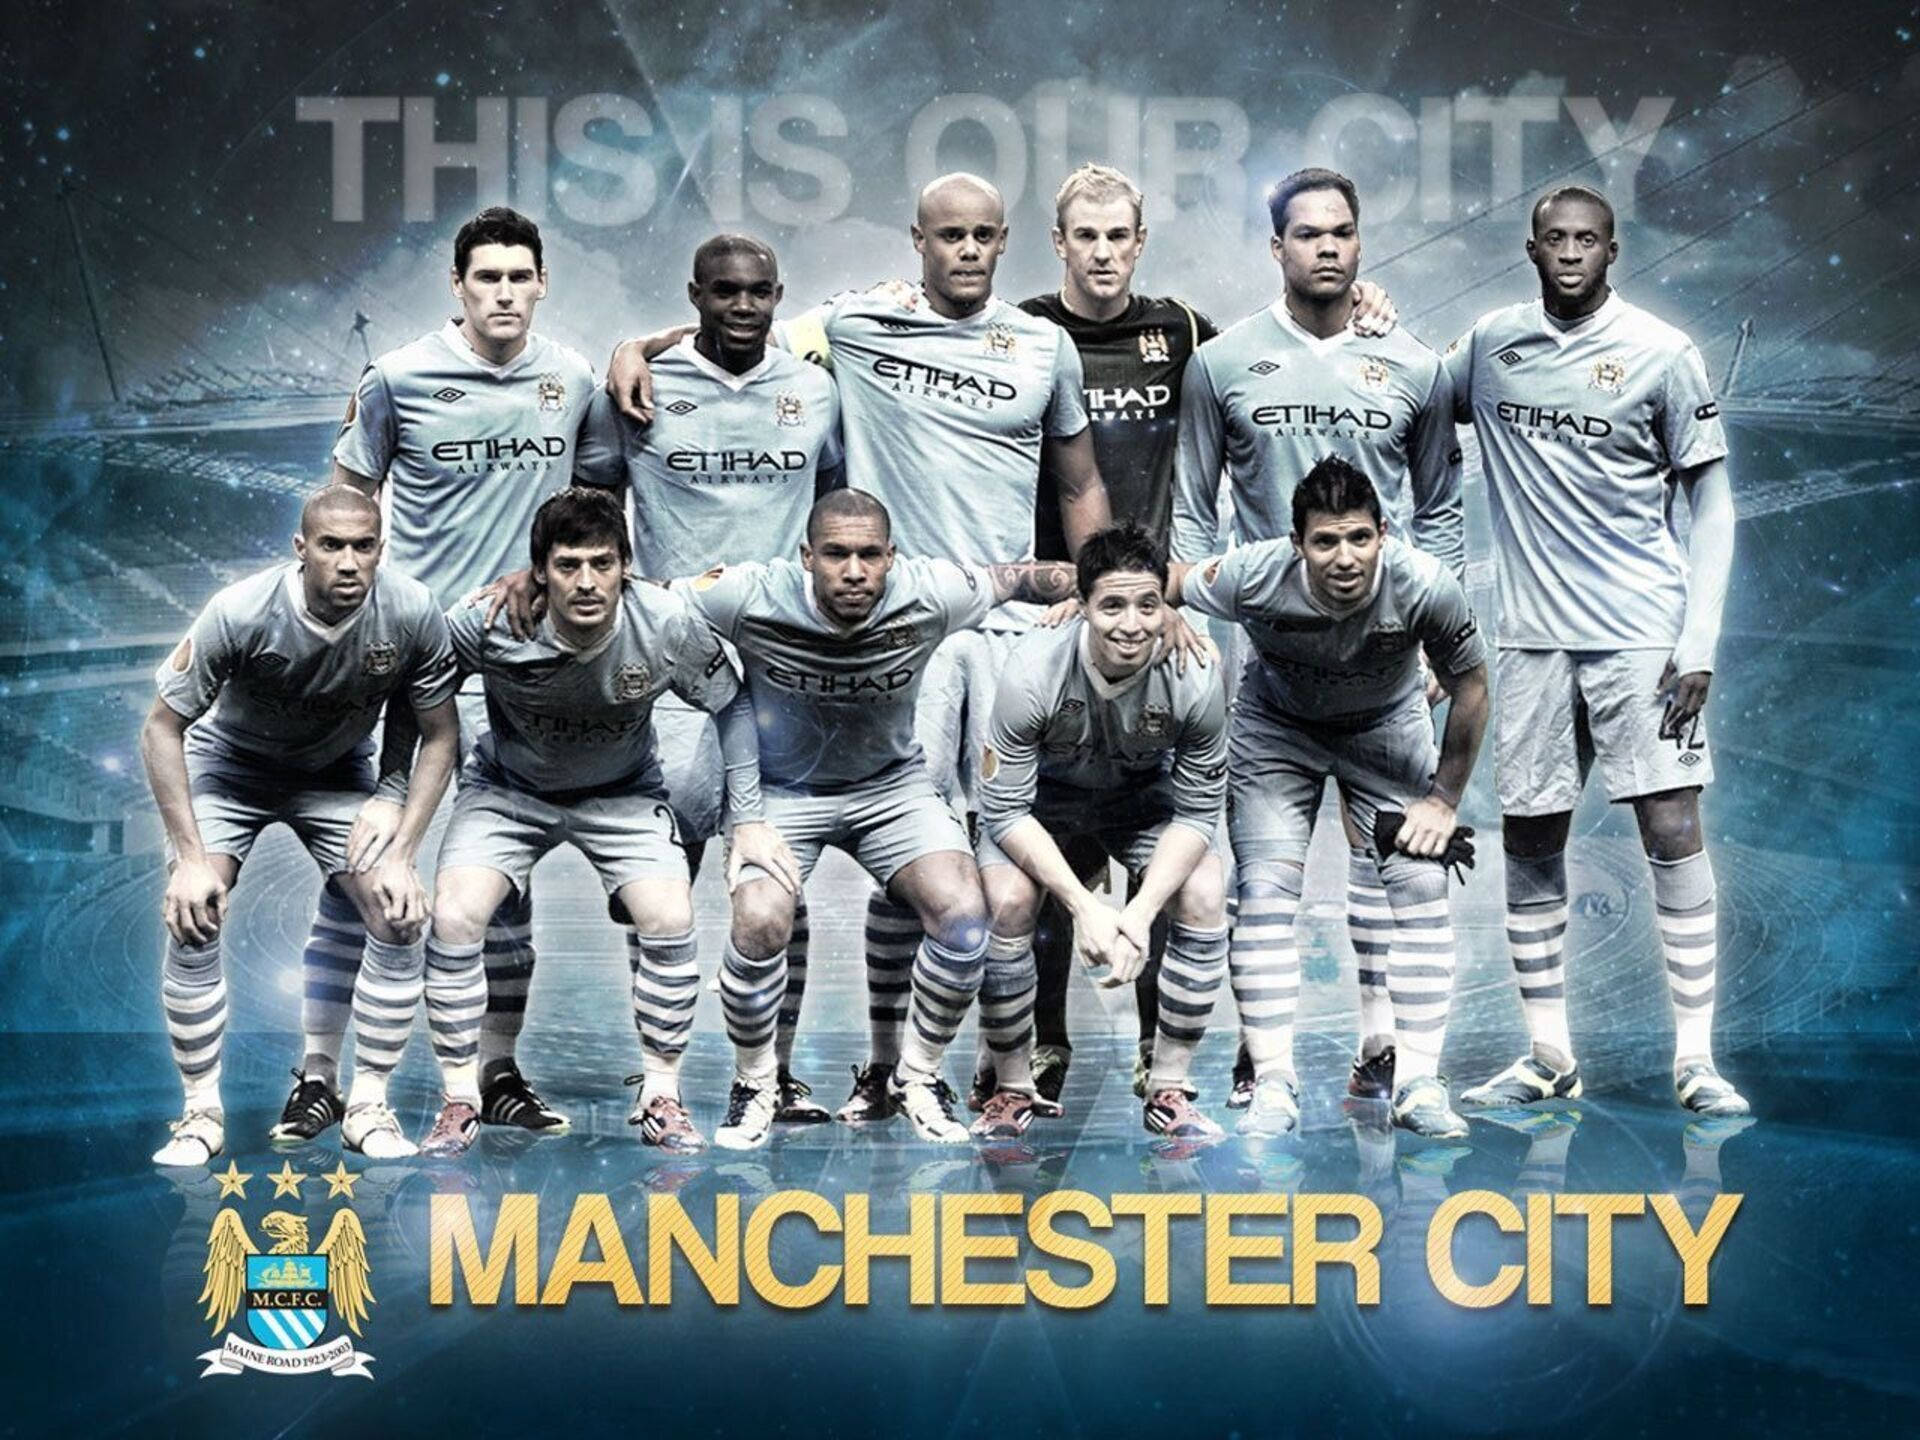 300+] Manchester City Wallpapers | Wallpapers.com